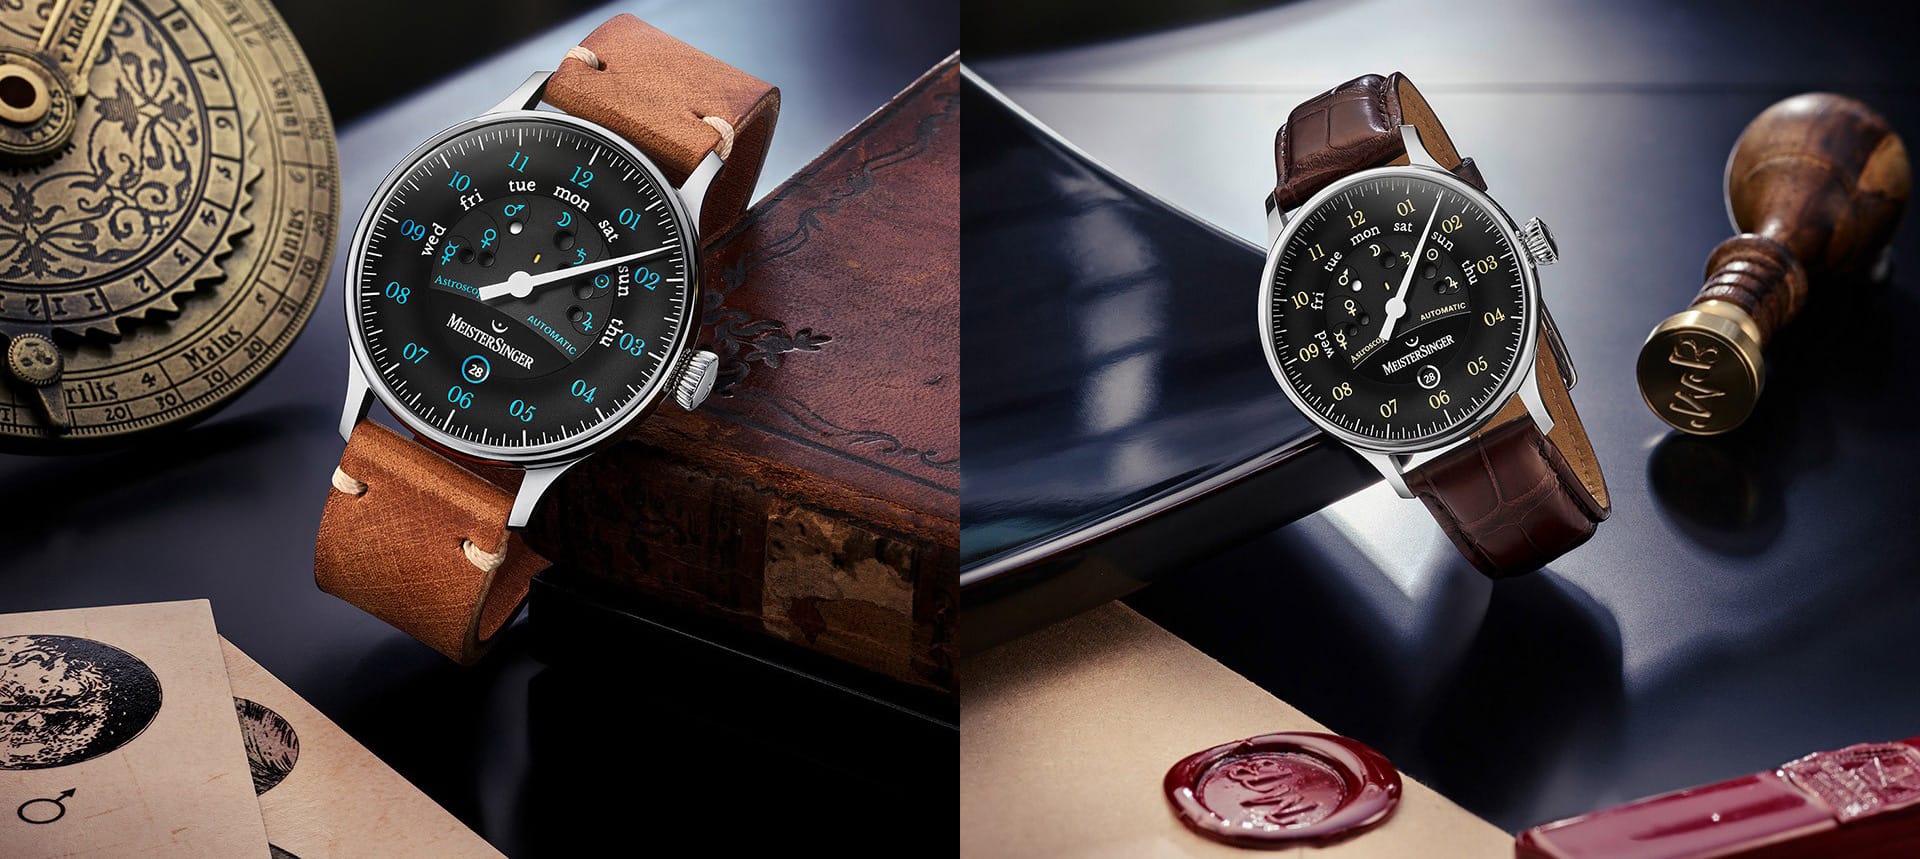 Introducing the new MeisterSinger Astroscope